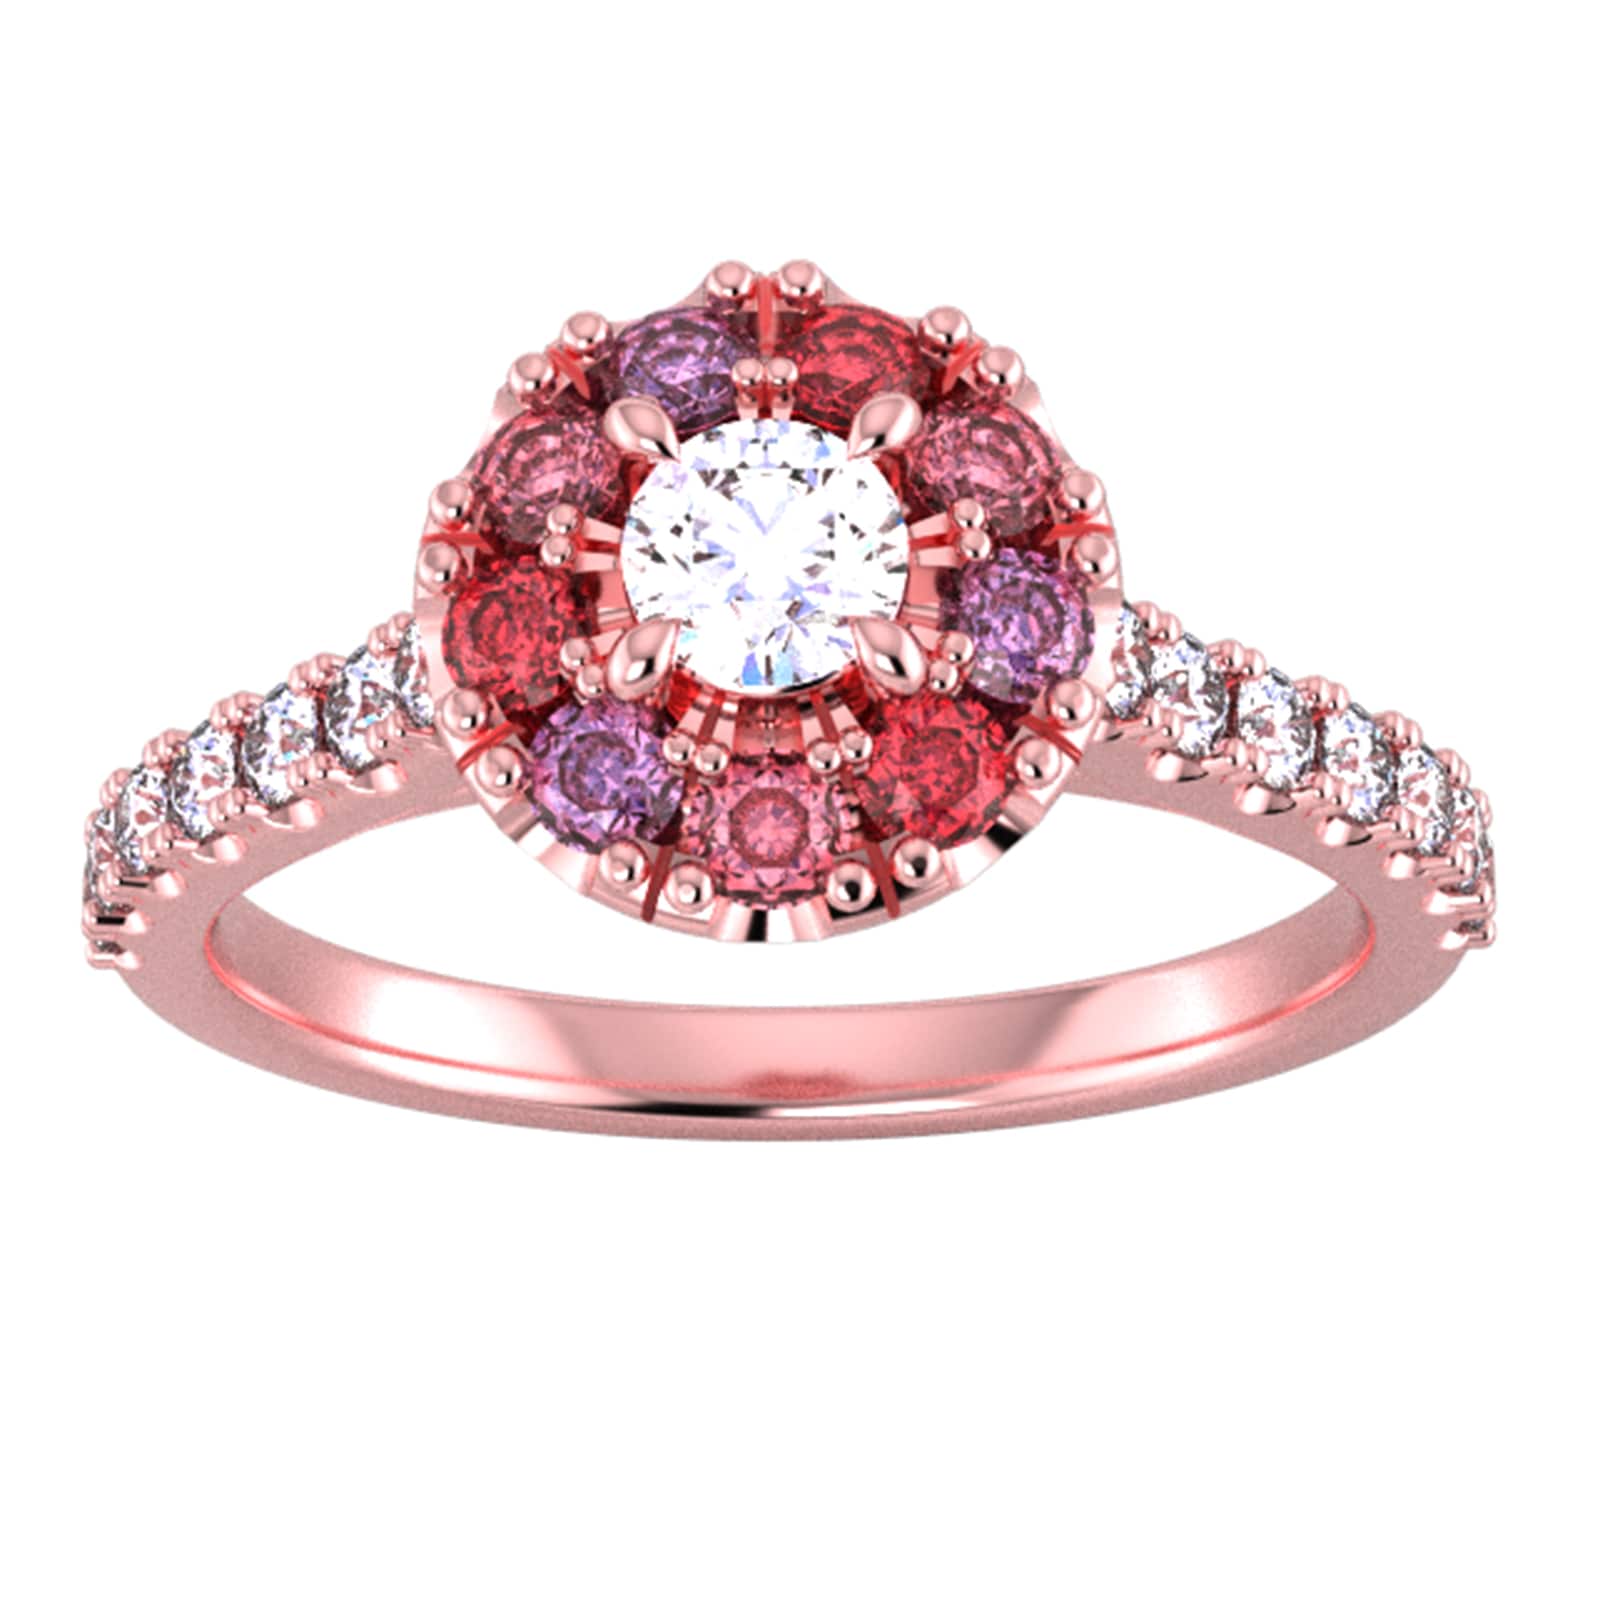 18ct Rose Gold Diamond & Red, Pink, Purple Sapphire Halo Ring - Ring Size M.5